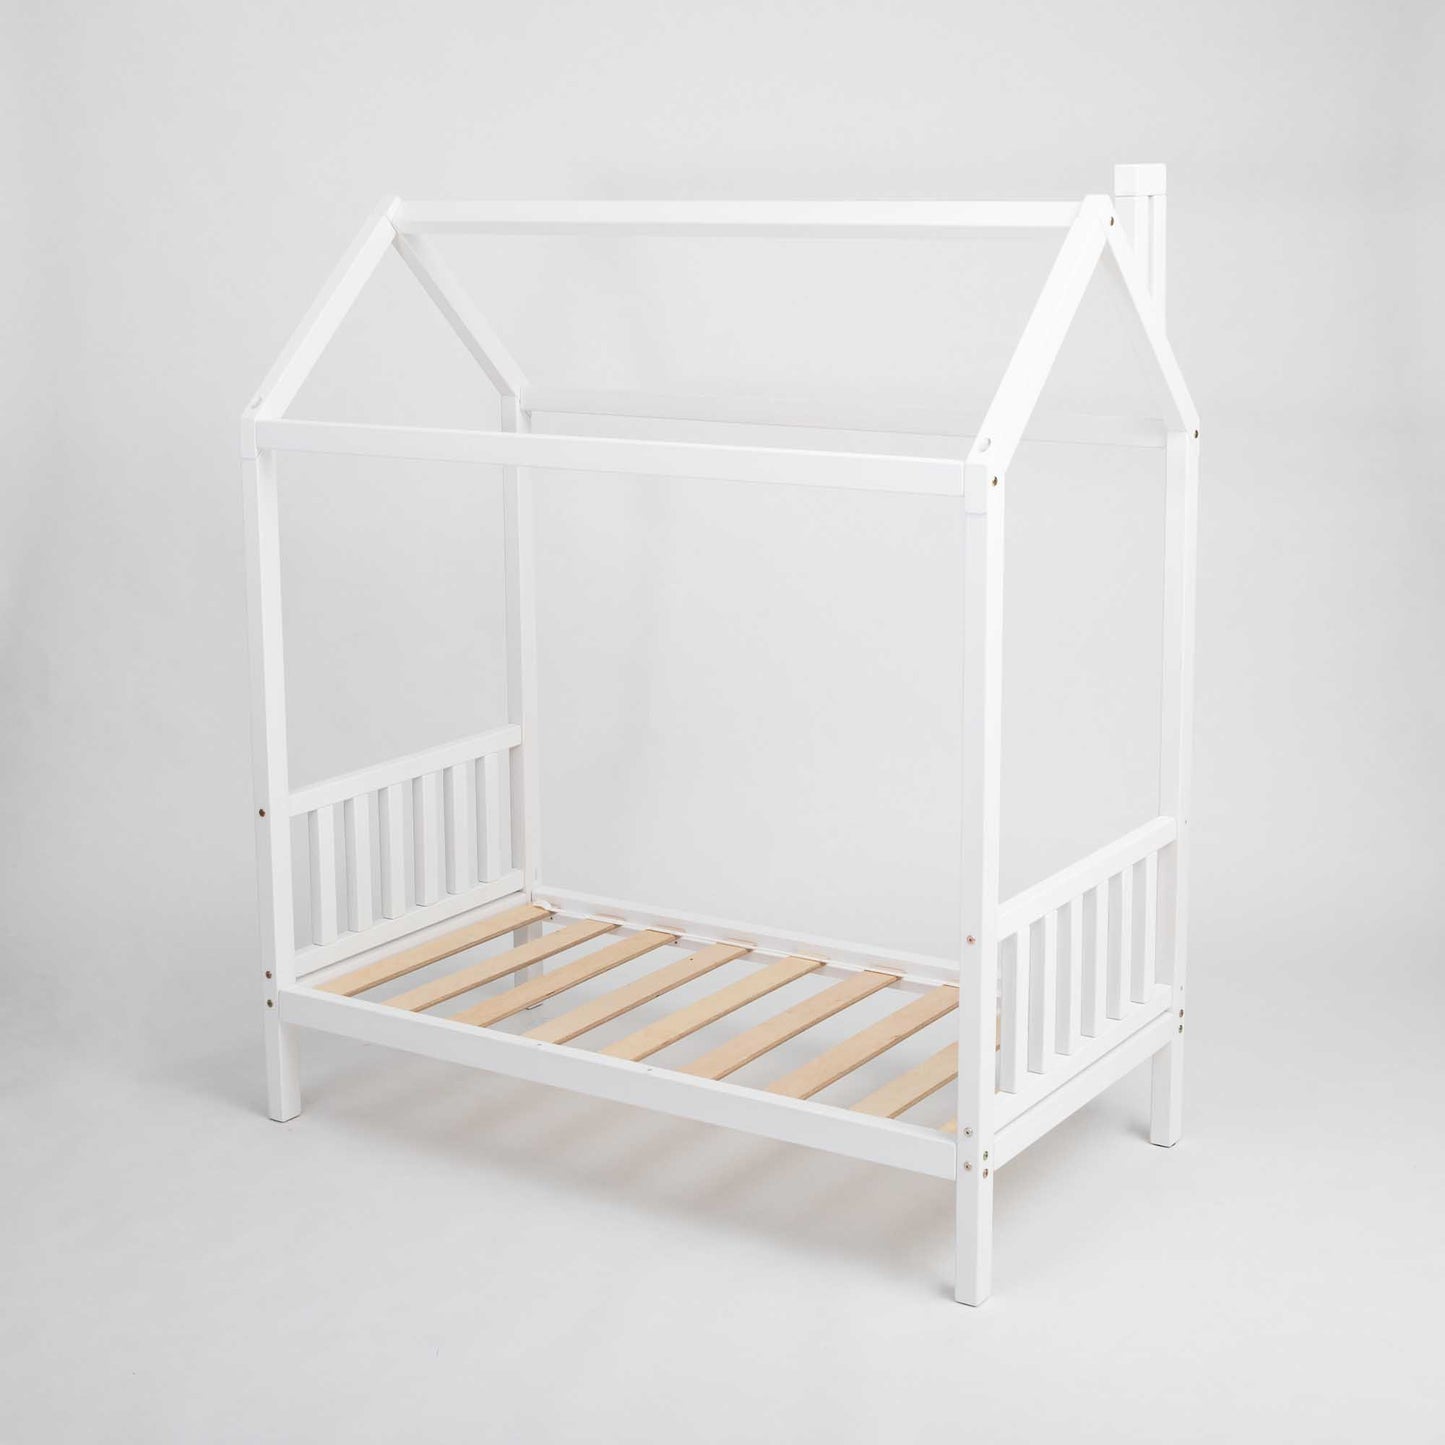 A white raised toddler house bed on legs with a wooden frame and slats.